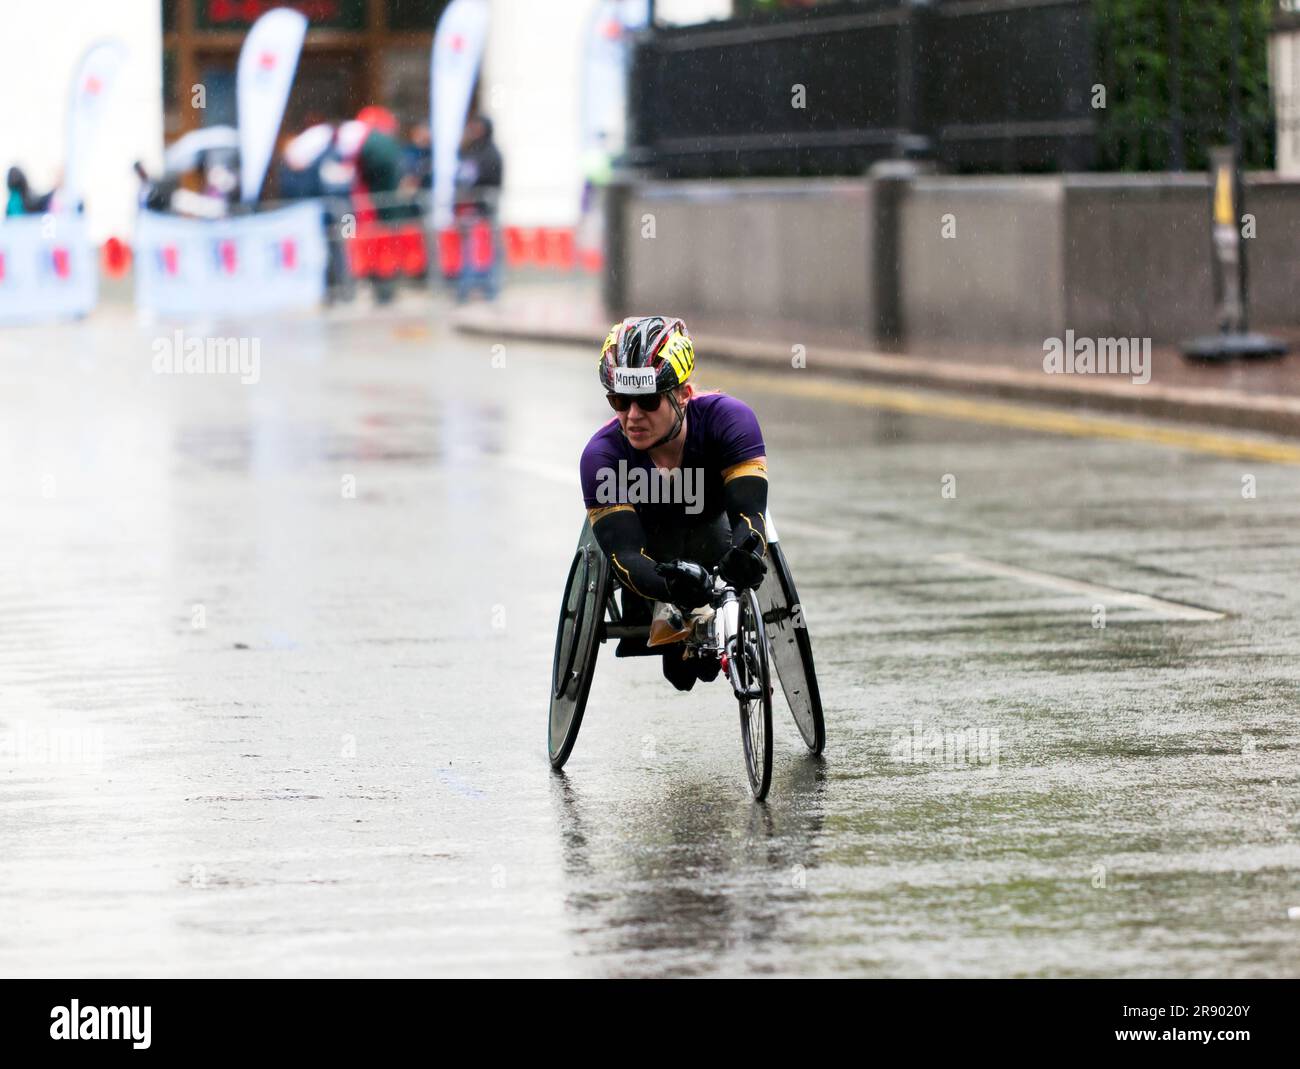 Patricia Eachus (SUI), passing through Cabot Square, on her way to finishing 16th, in the Women's Elite Wheelchair Race in the 2023 London Marathon Stock Photo